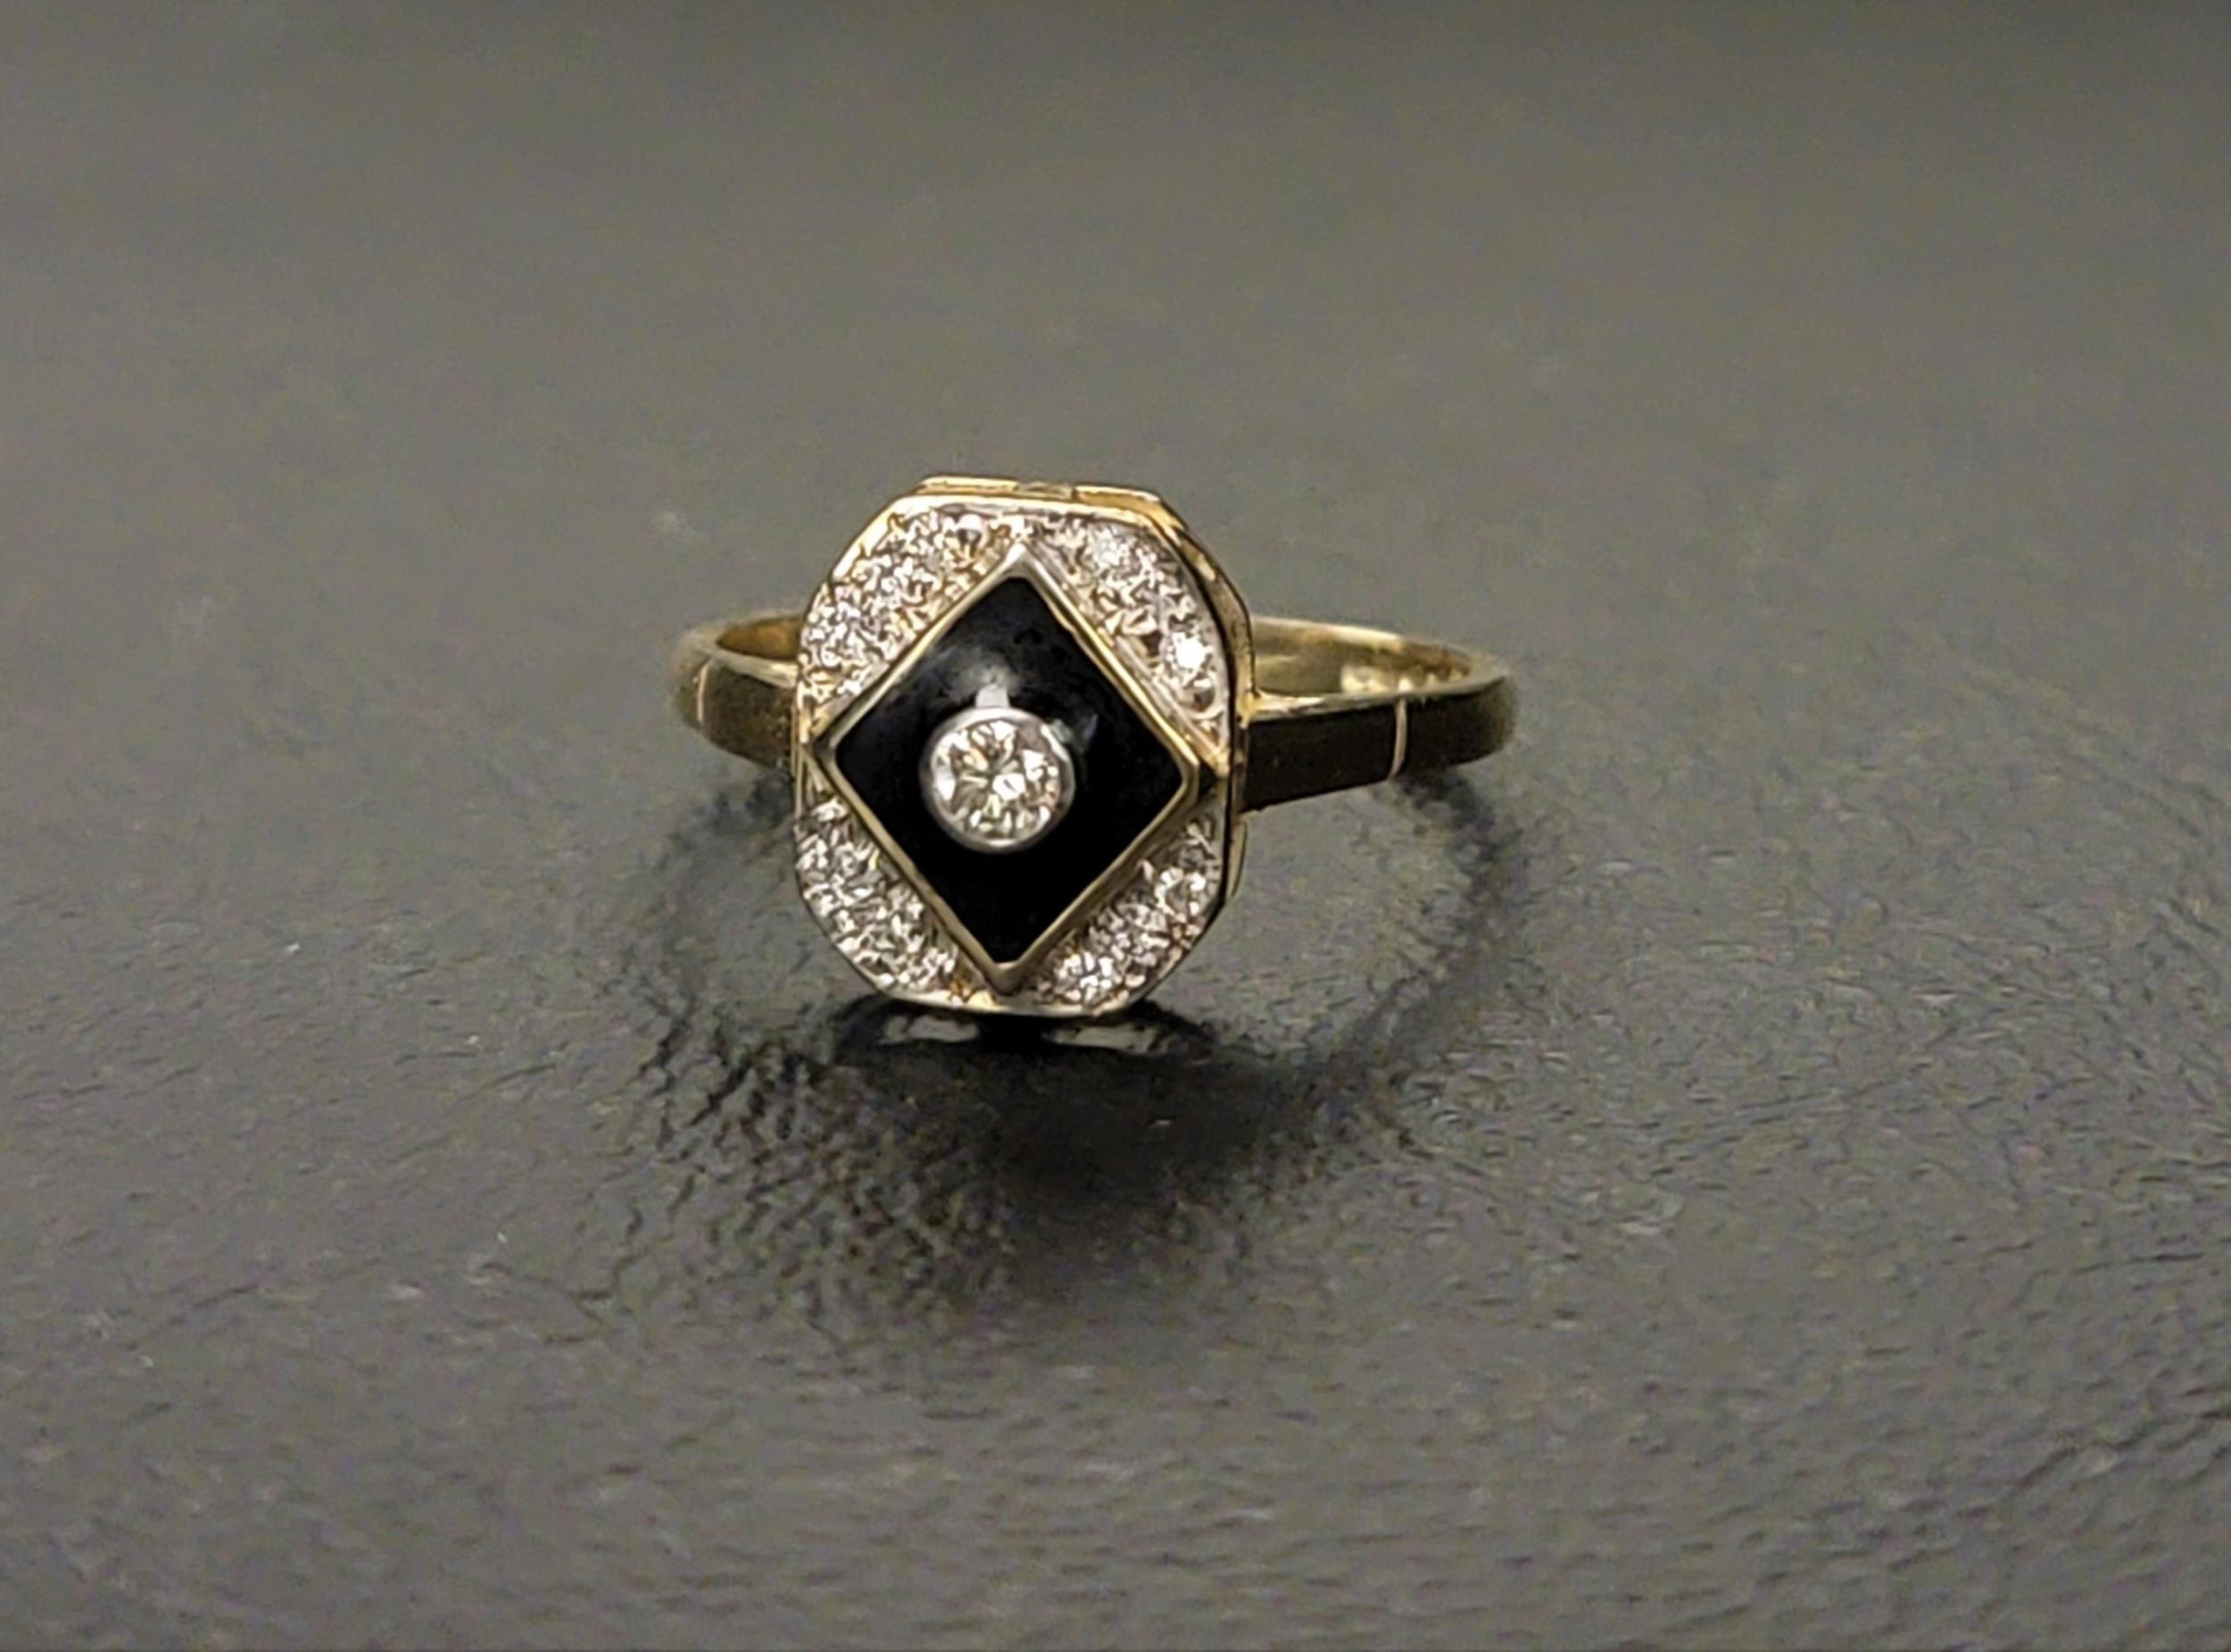 ART DECO STYLE ENAMEL AND DIAMOND RING the central bezel set diamond approximately 0.07cts in a - Image 2 of 2